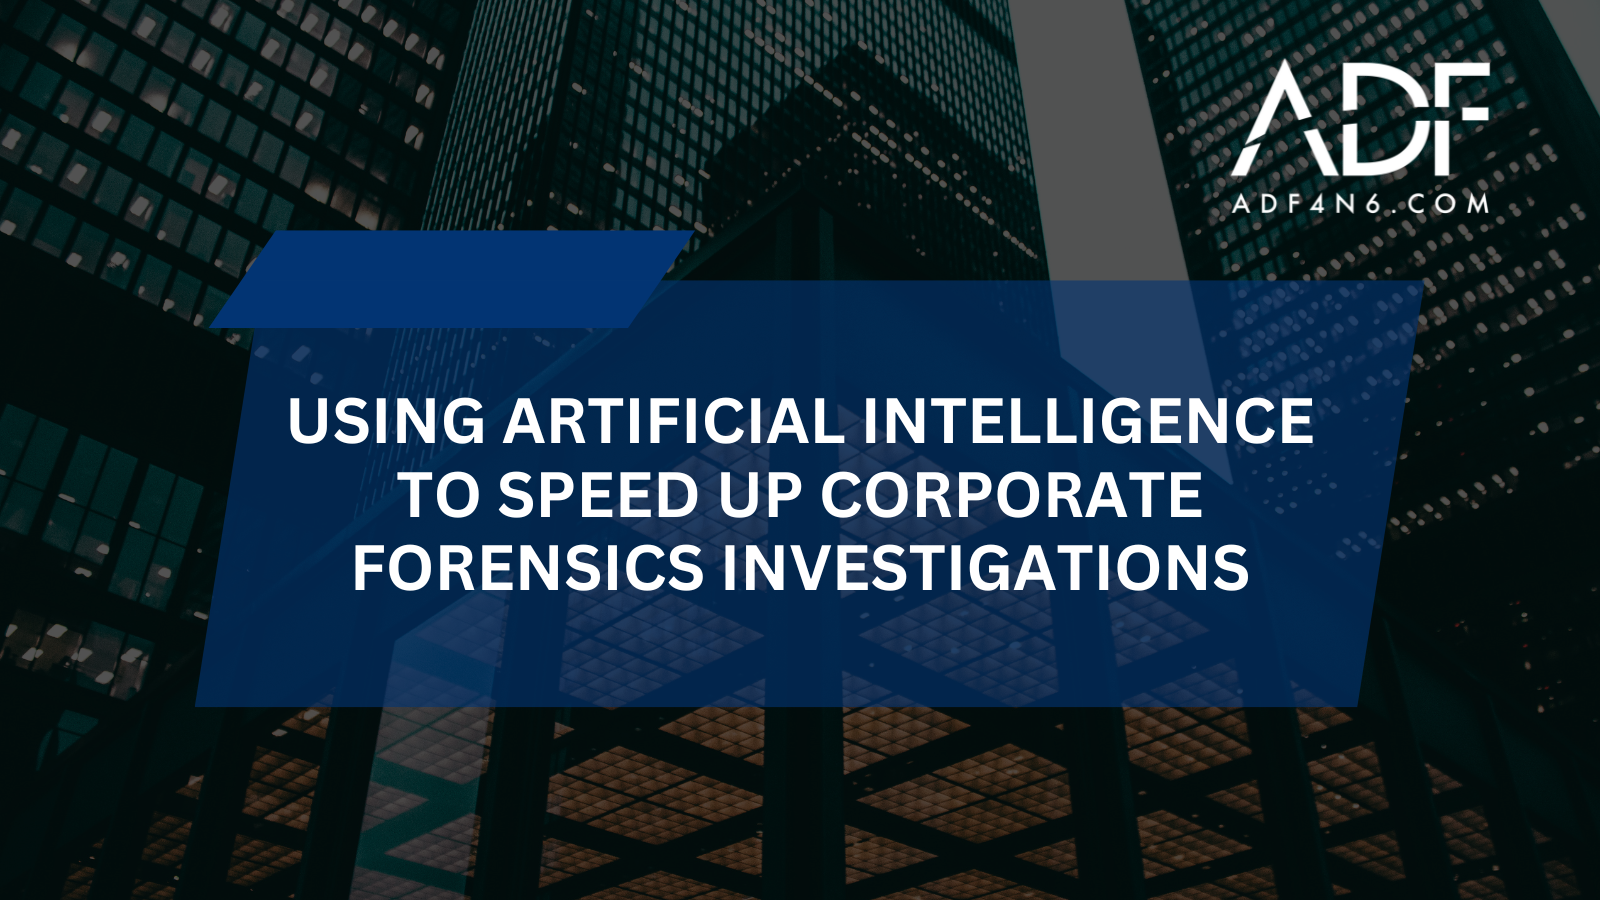 Using Artificial Intelligence to Speed Up Corporate Forensics Investigations